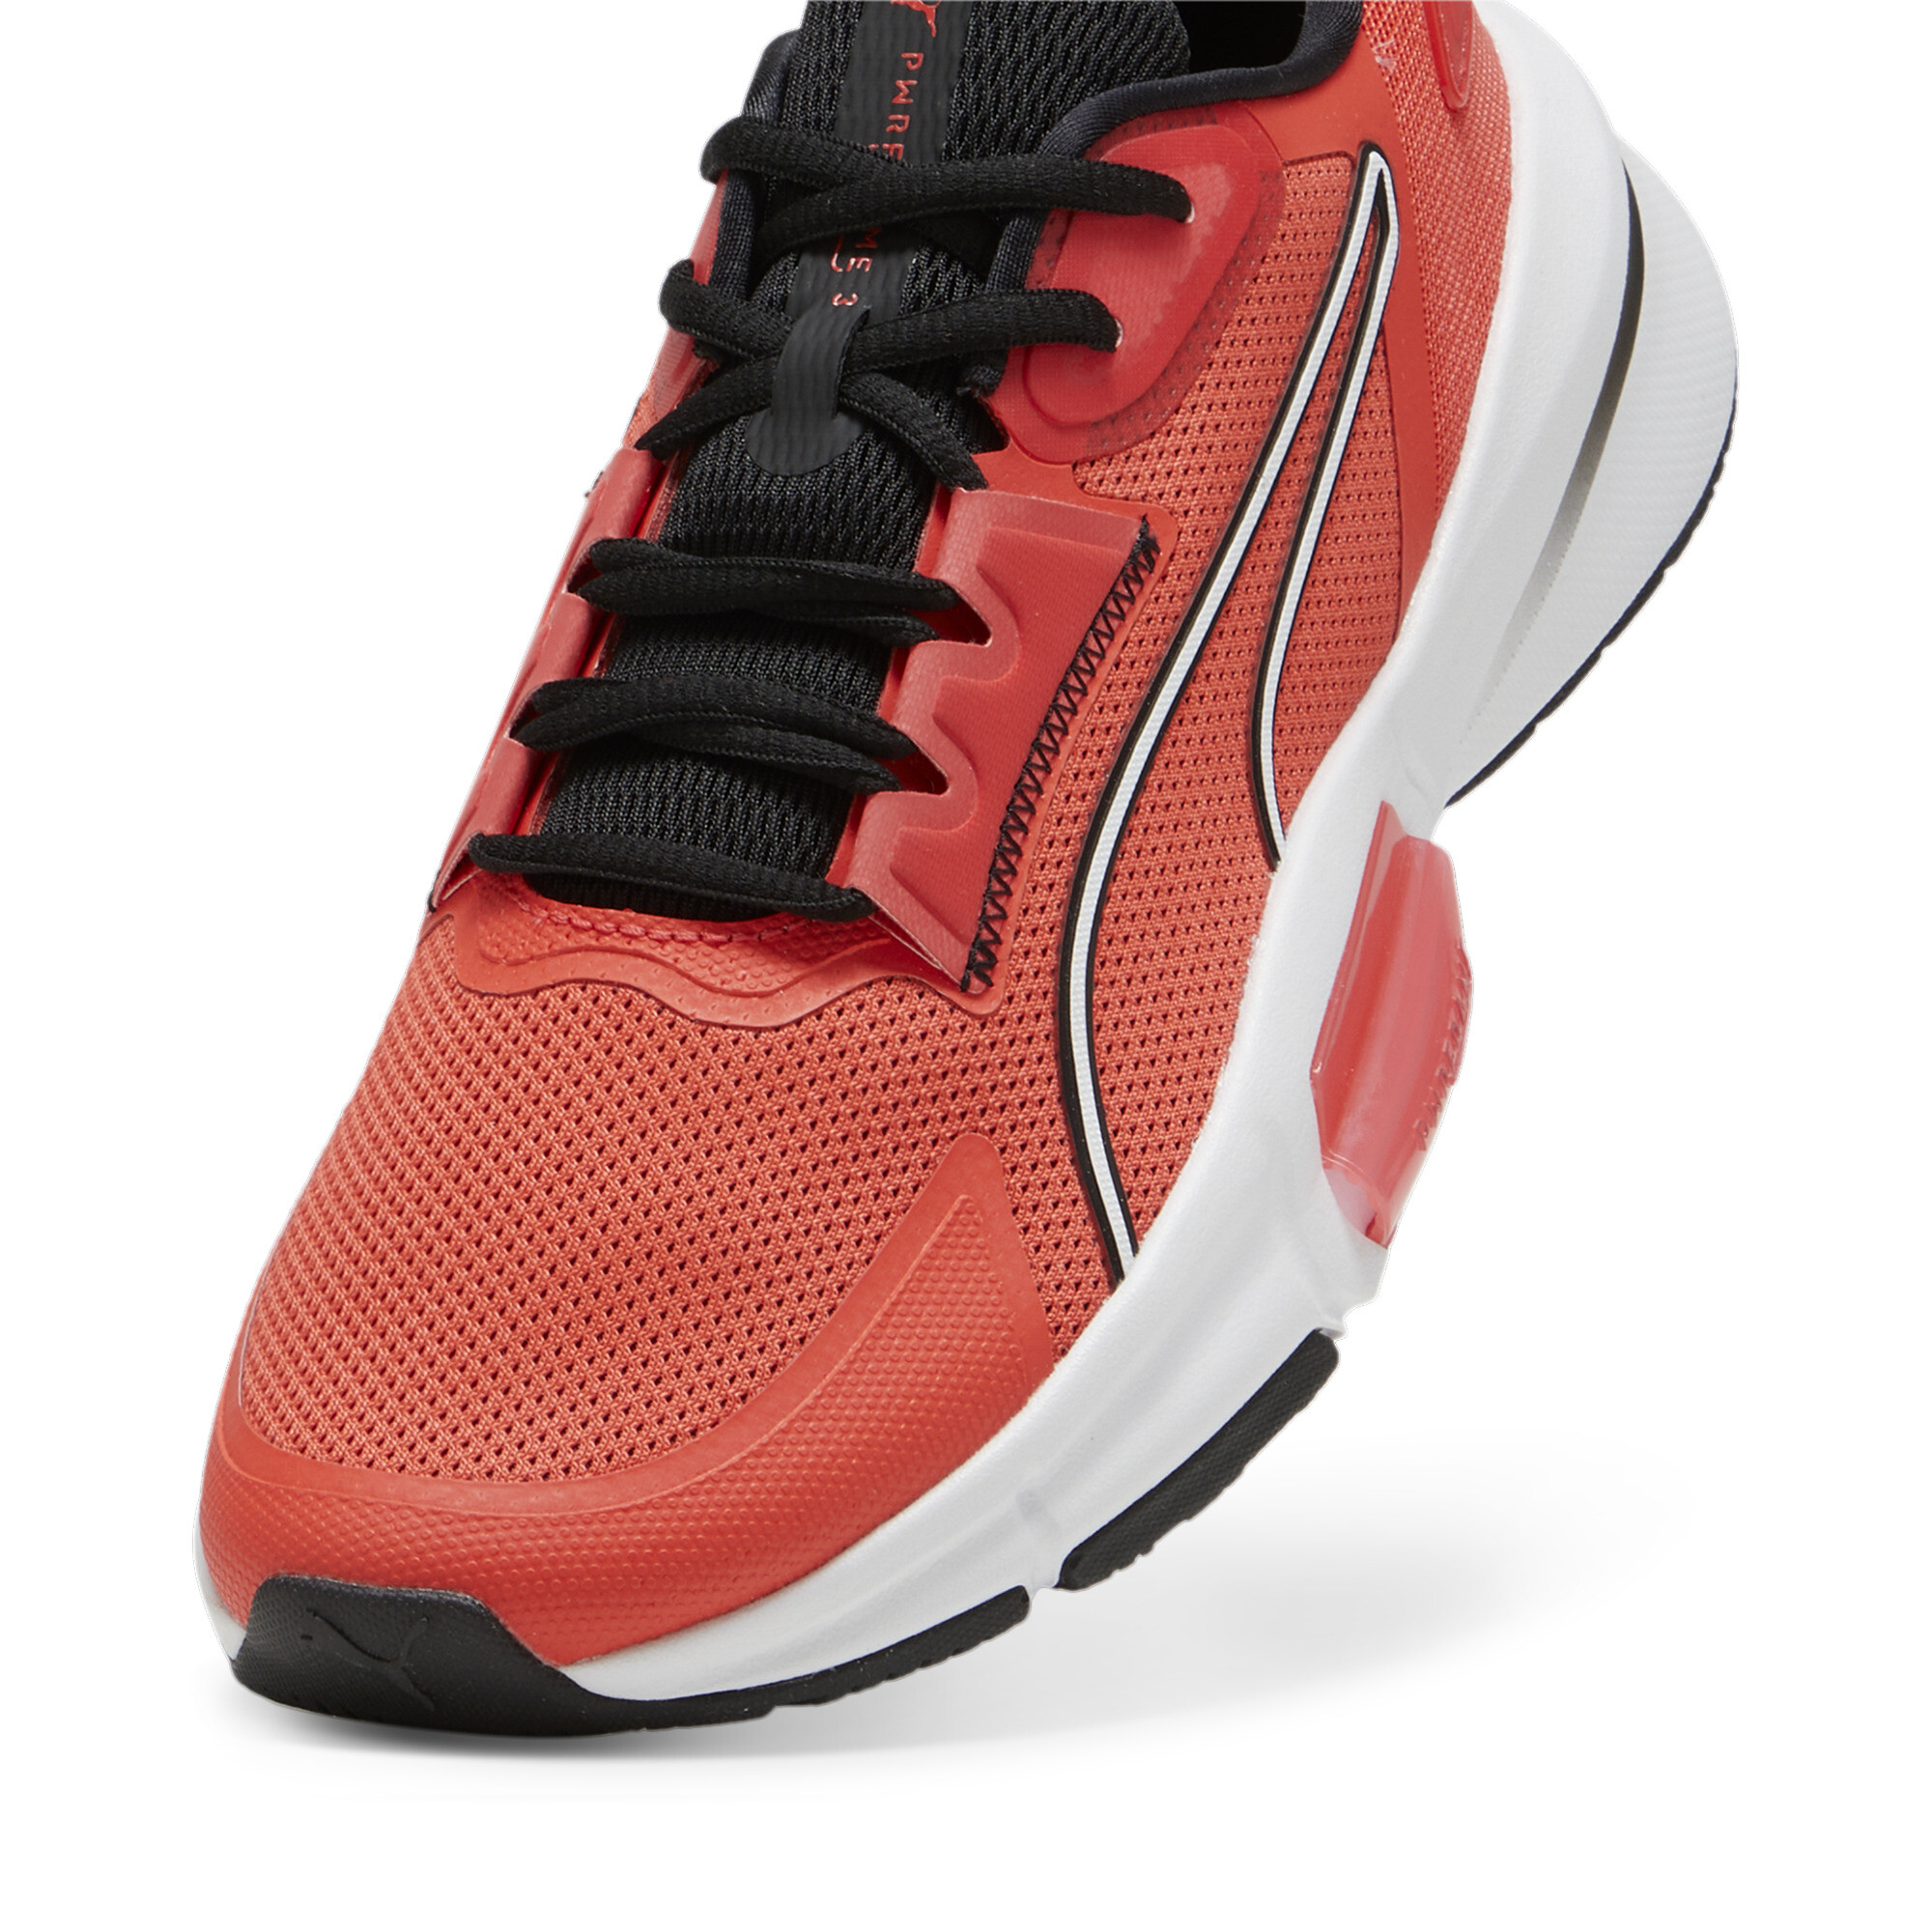 Men's PUMA PWRFrame TR 3 Training Shoes In Red, Size EU 44.5